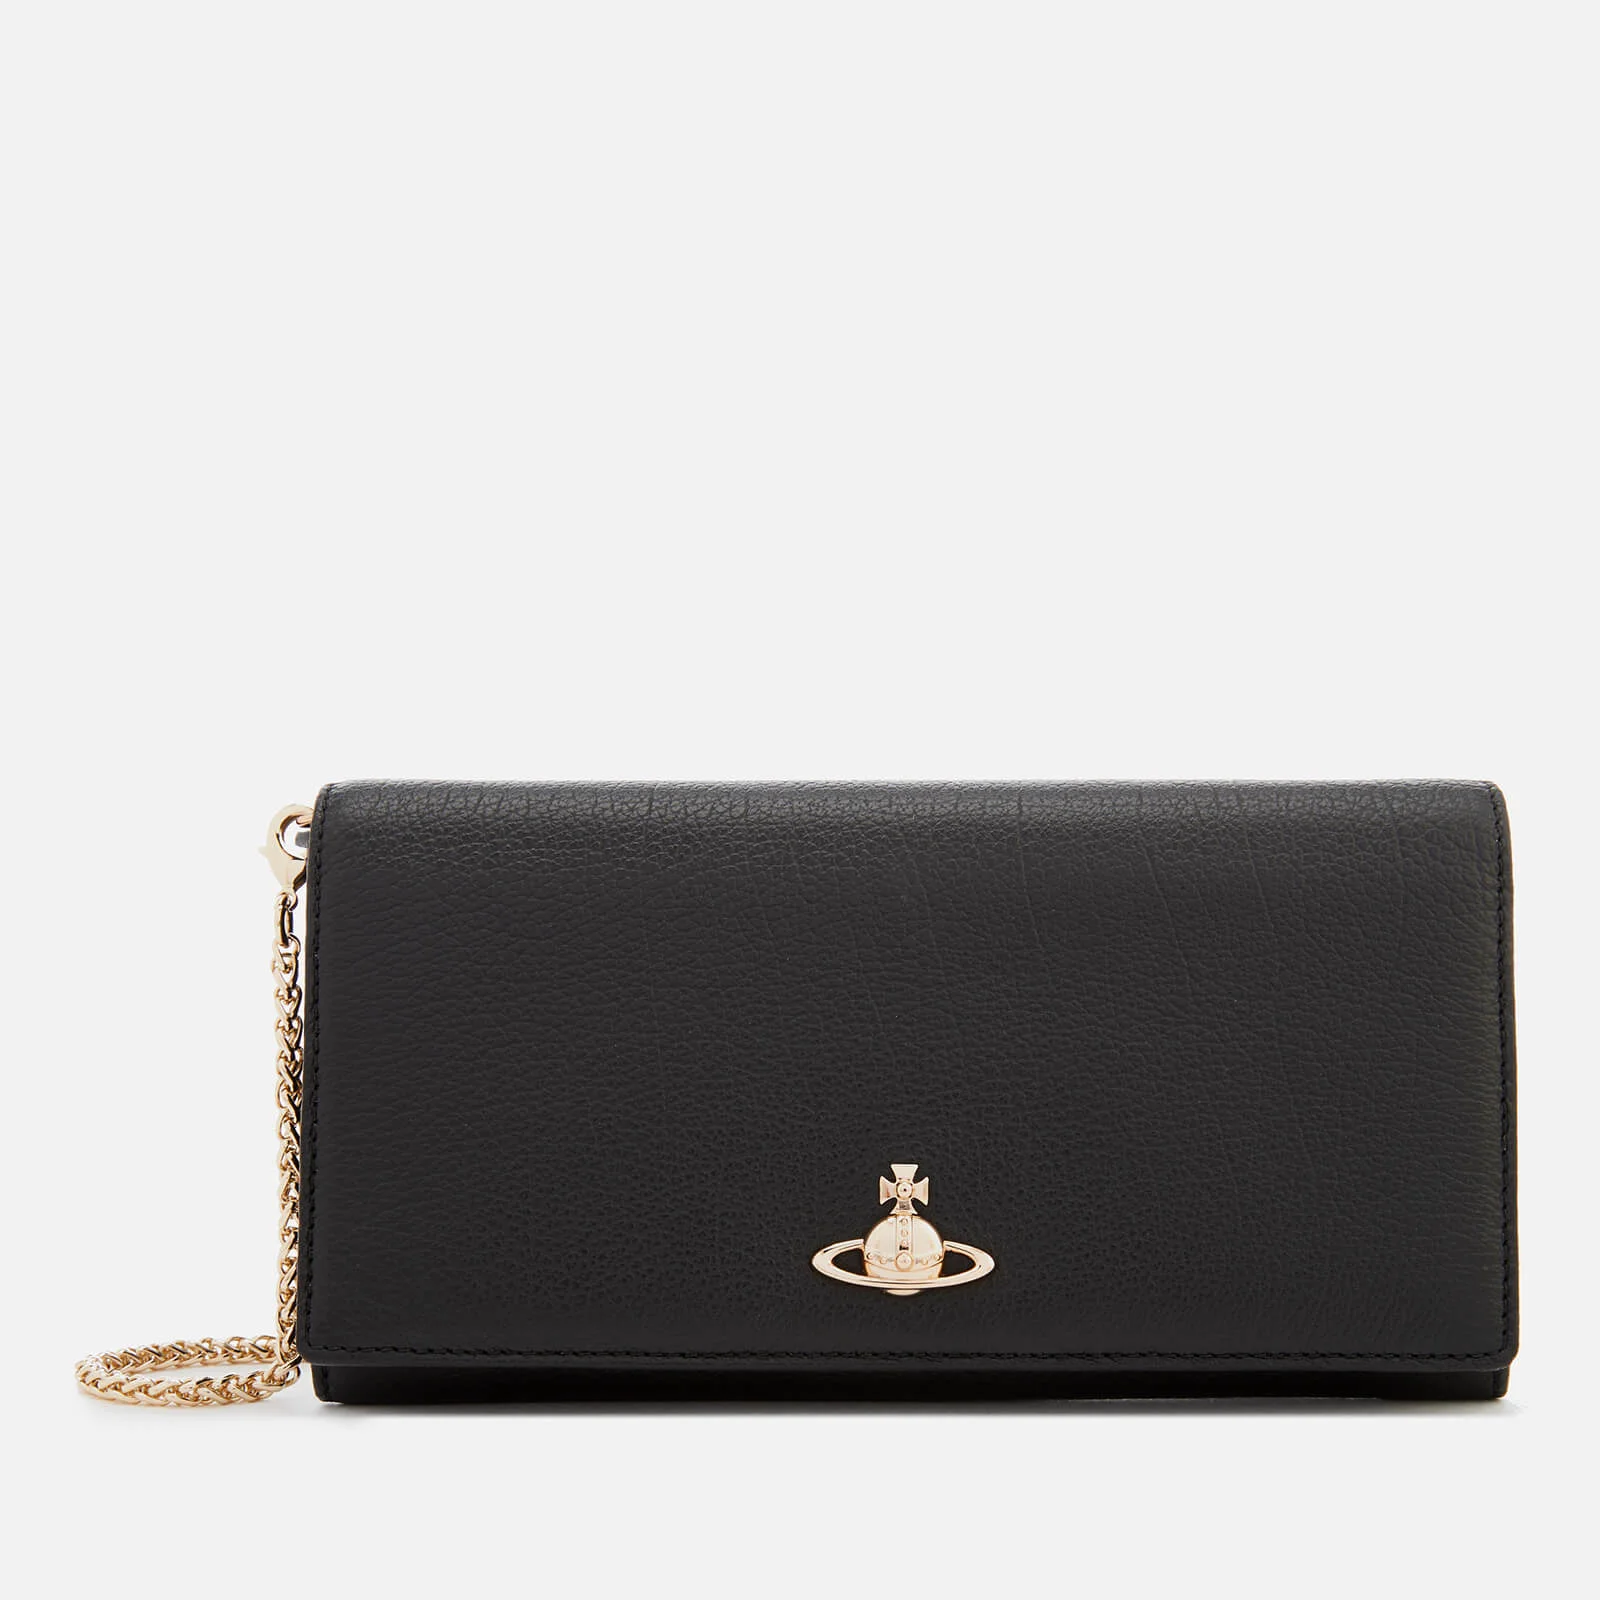 Vivienne Westwood Women's Balmoral Long Wallet with Chain - Black Image 1